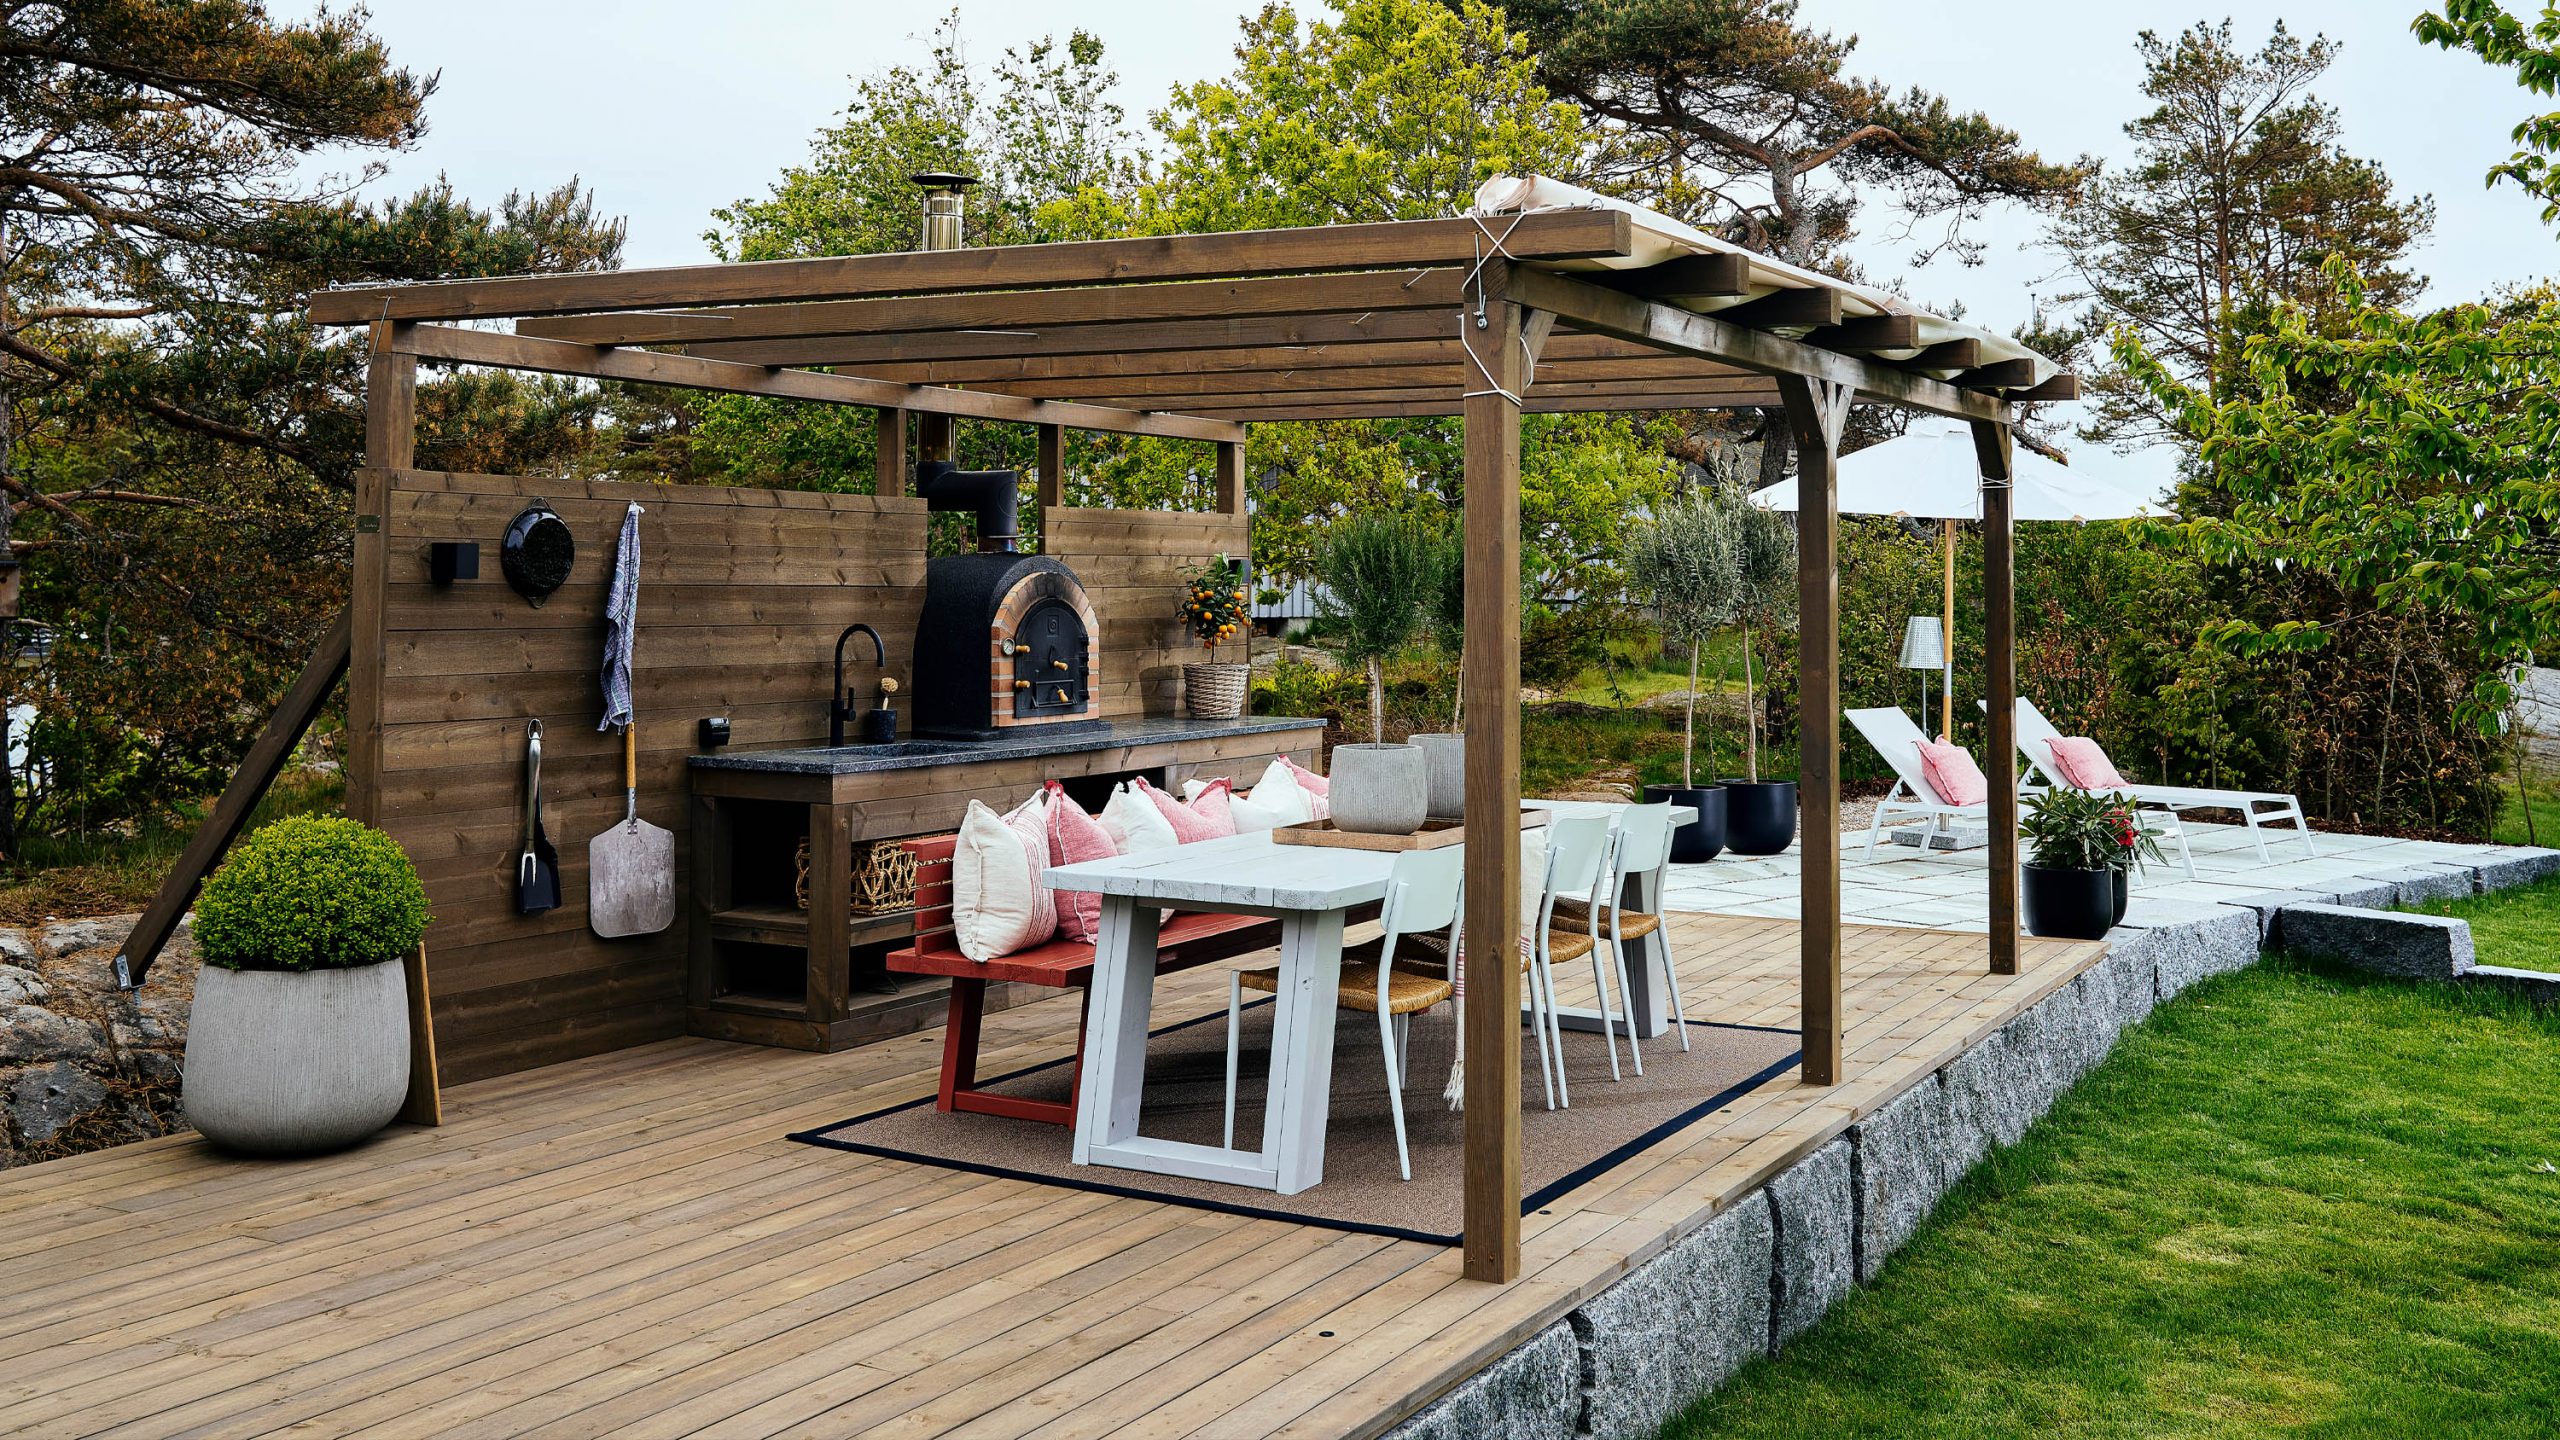 Outdoor kitchen setup with deck